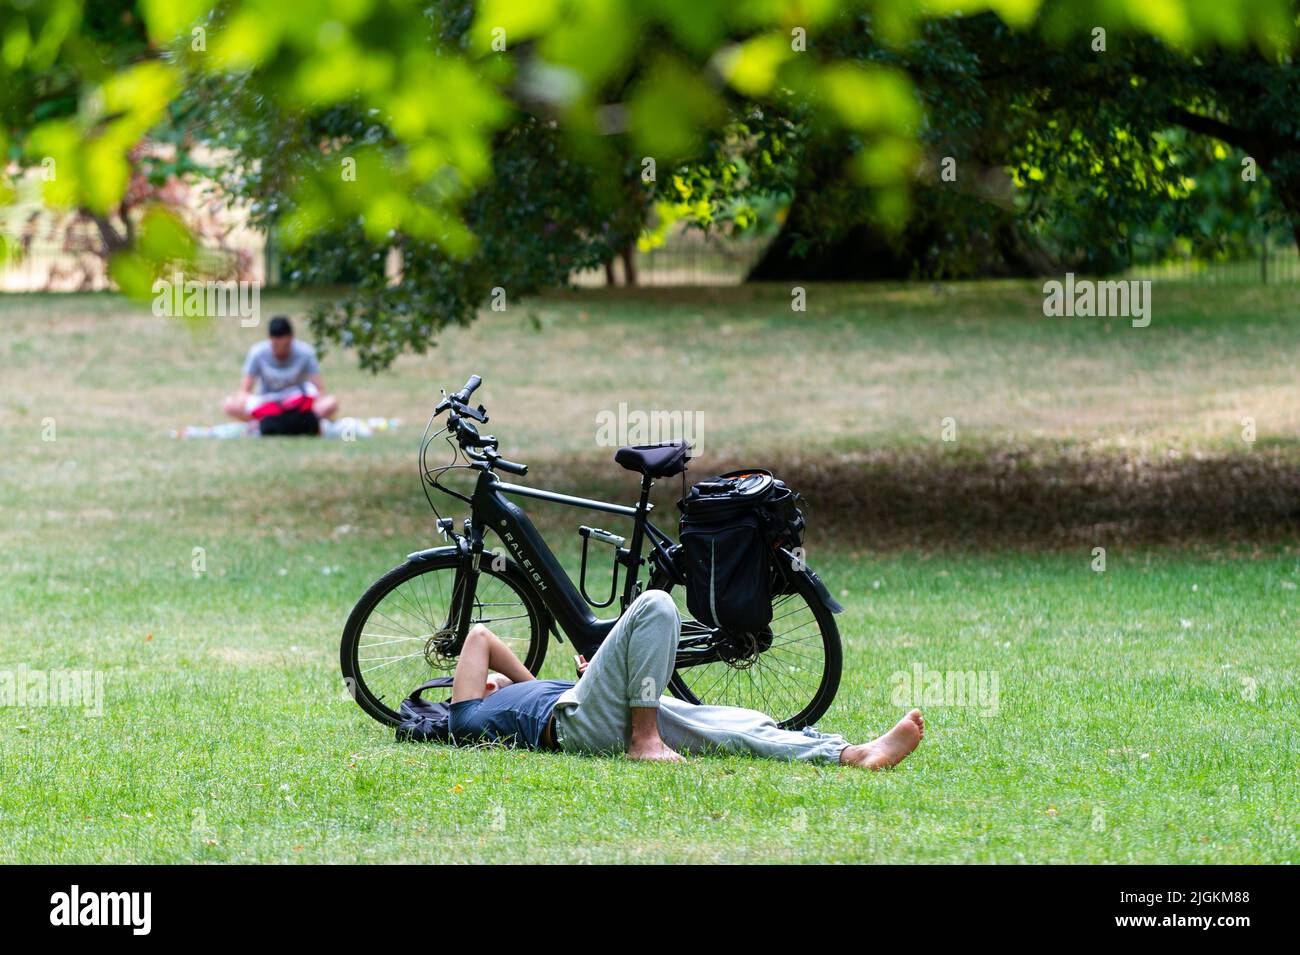 London, UK.  11 July 2022.  UK Weather – A man sunbathes in St James’s Park on a day when temperatures are expected to rise to 32C.  The UK is currently experiencing a heatwave and hot temperatures and a lack of rainfall is expected, particularly in the south east of the country, to continue for the next 10 days.  Credit: Stephen Chung / Alamy Live News Stock Photo